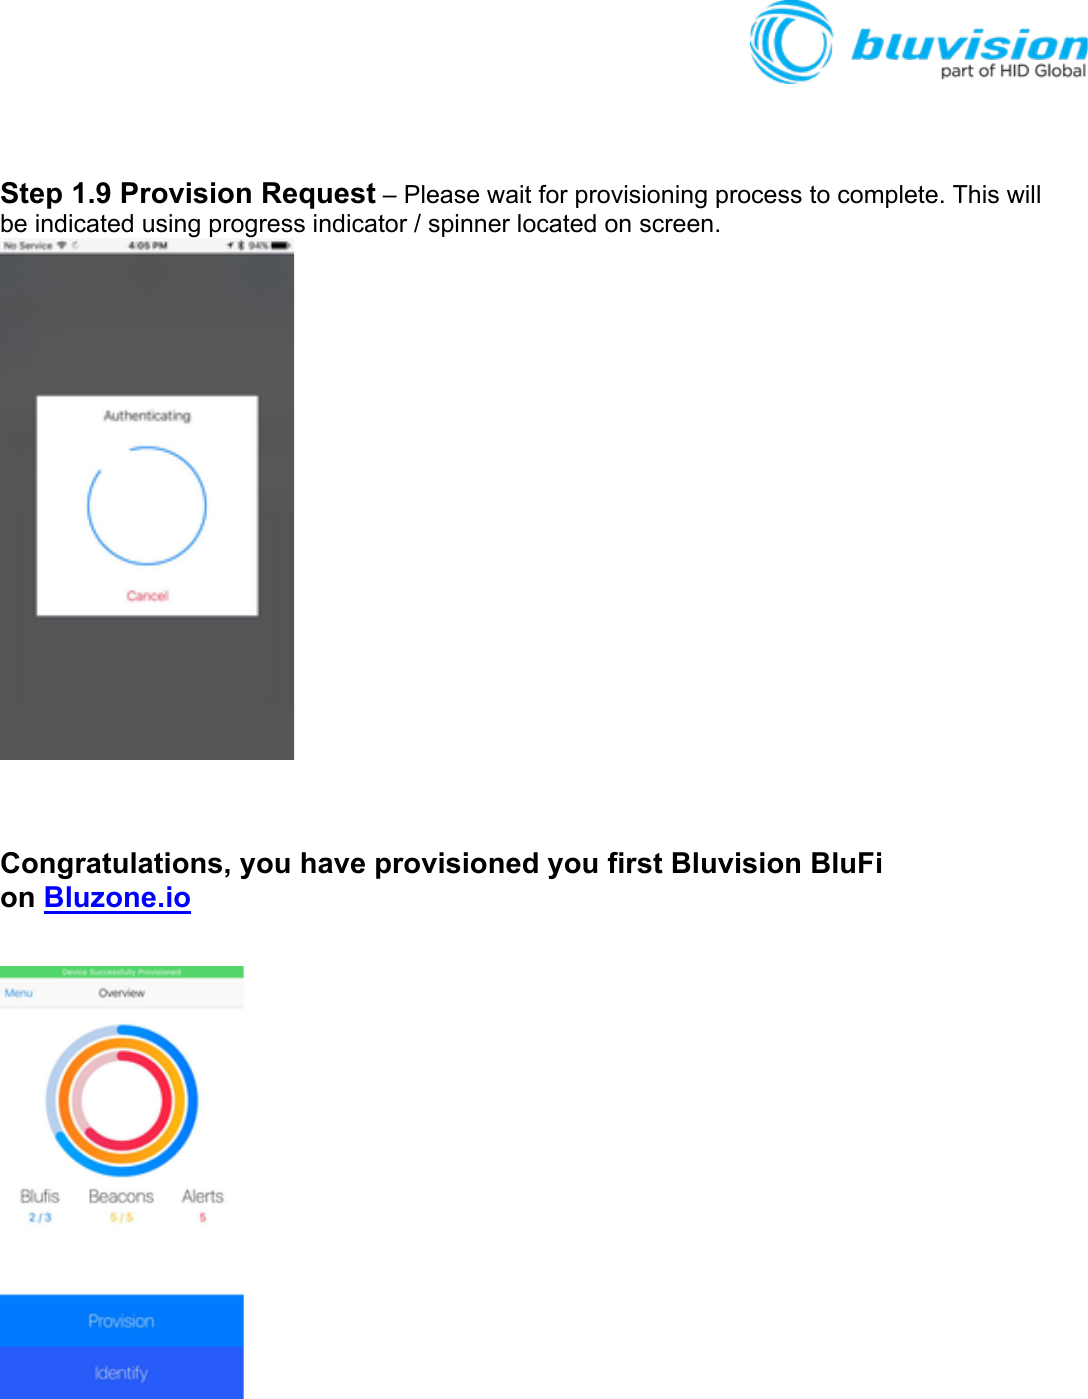  Step 1.9 Provision Request – Please wait for provisioning process to complete. This will be indicated using progress indicator / spinner located on screen.   Congratulations, you have provisioned you first Bluvision BluFi on Bluzone.io     